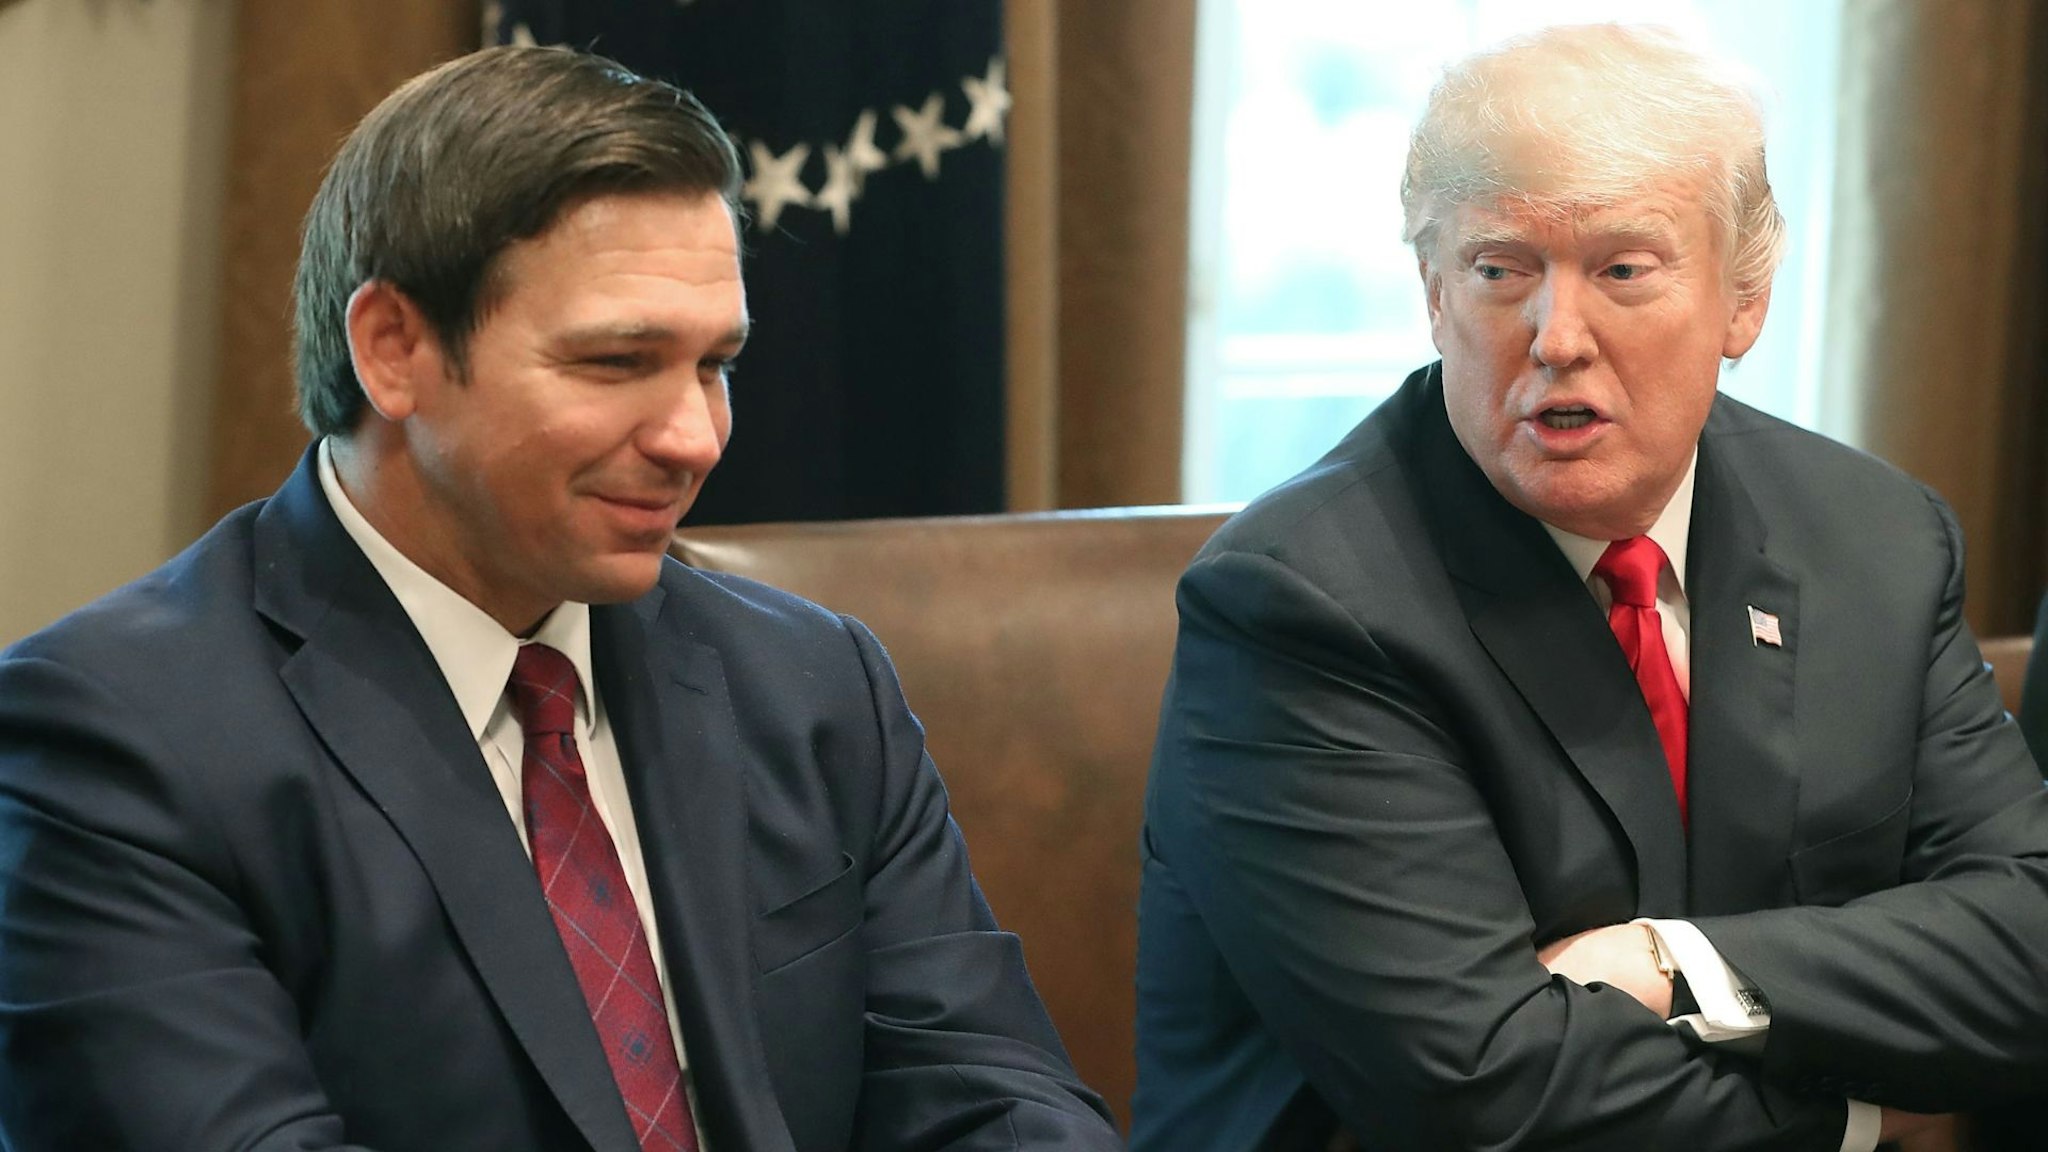 WASHINGTON, DC - DECEMBER 13: Florida Governor-elect Ron DeSantis (R) sits next to U.S. President Donald Trump during a meeting with Governors elects in the Cabinet Room at the White House on December 13, 2018 in Washington, DC.